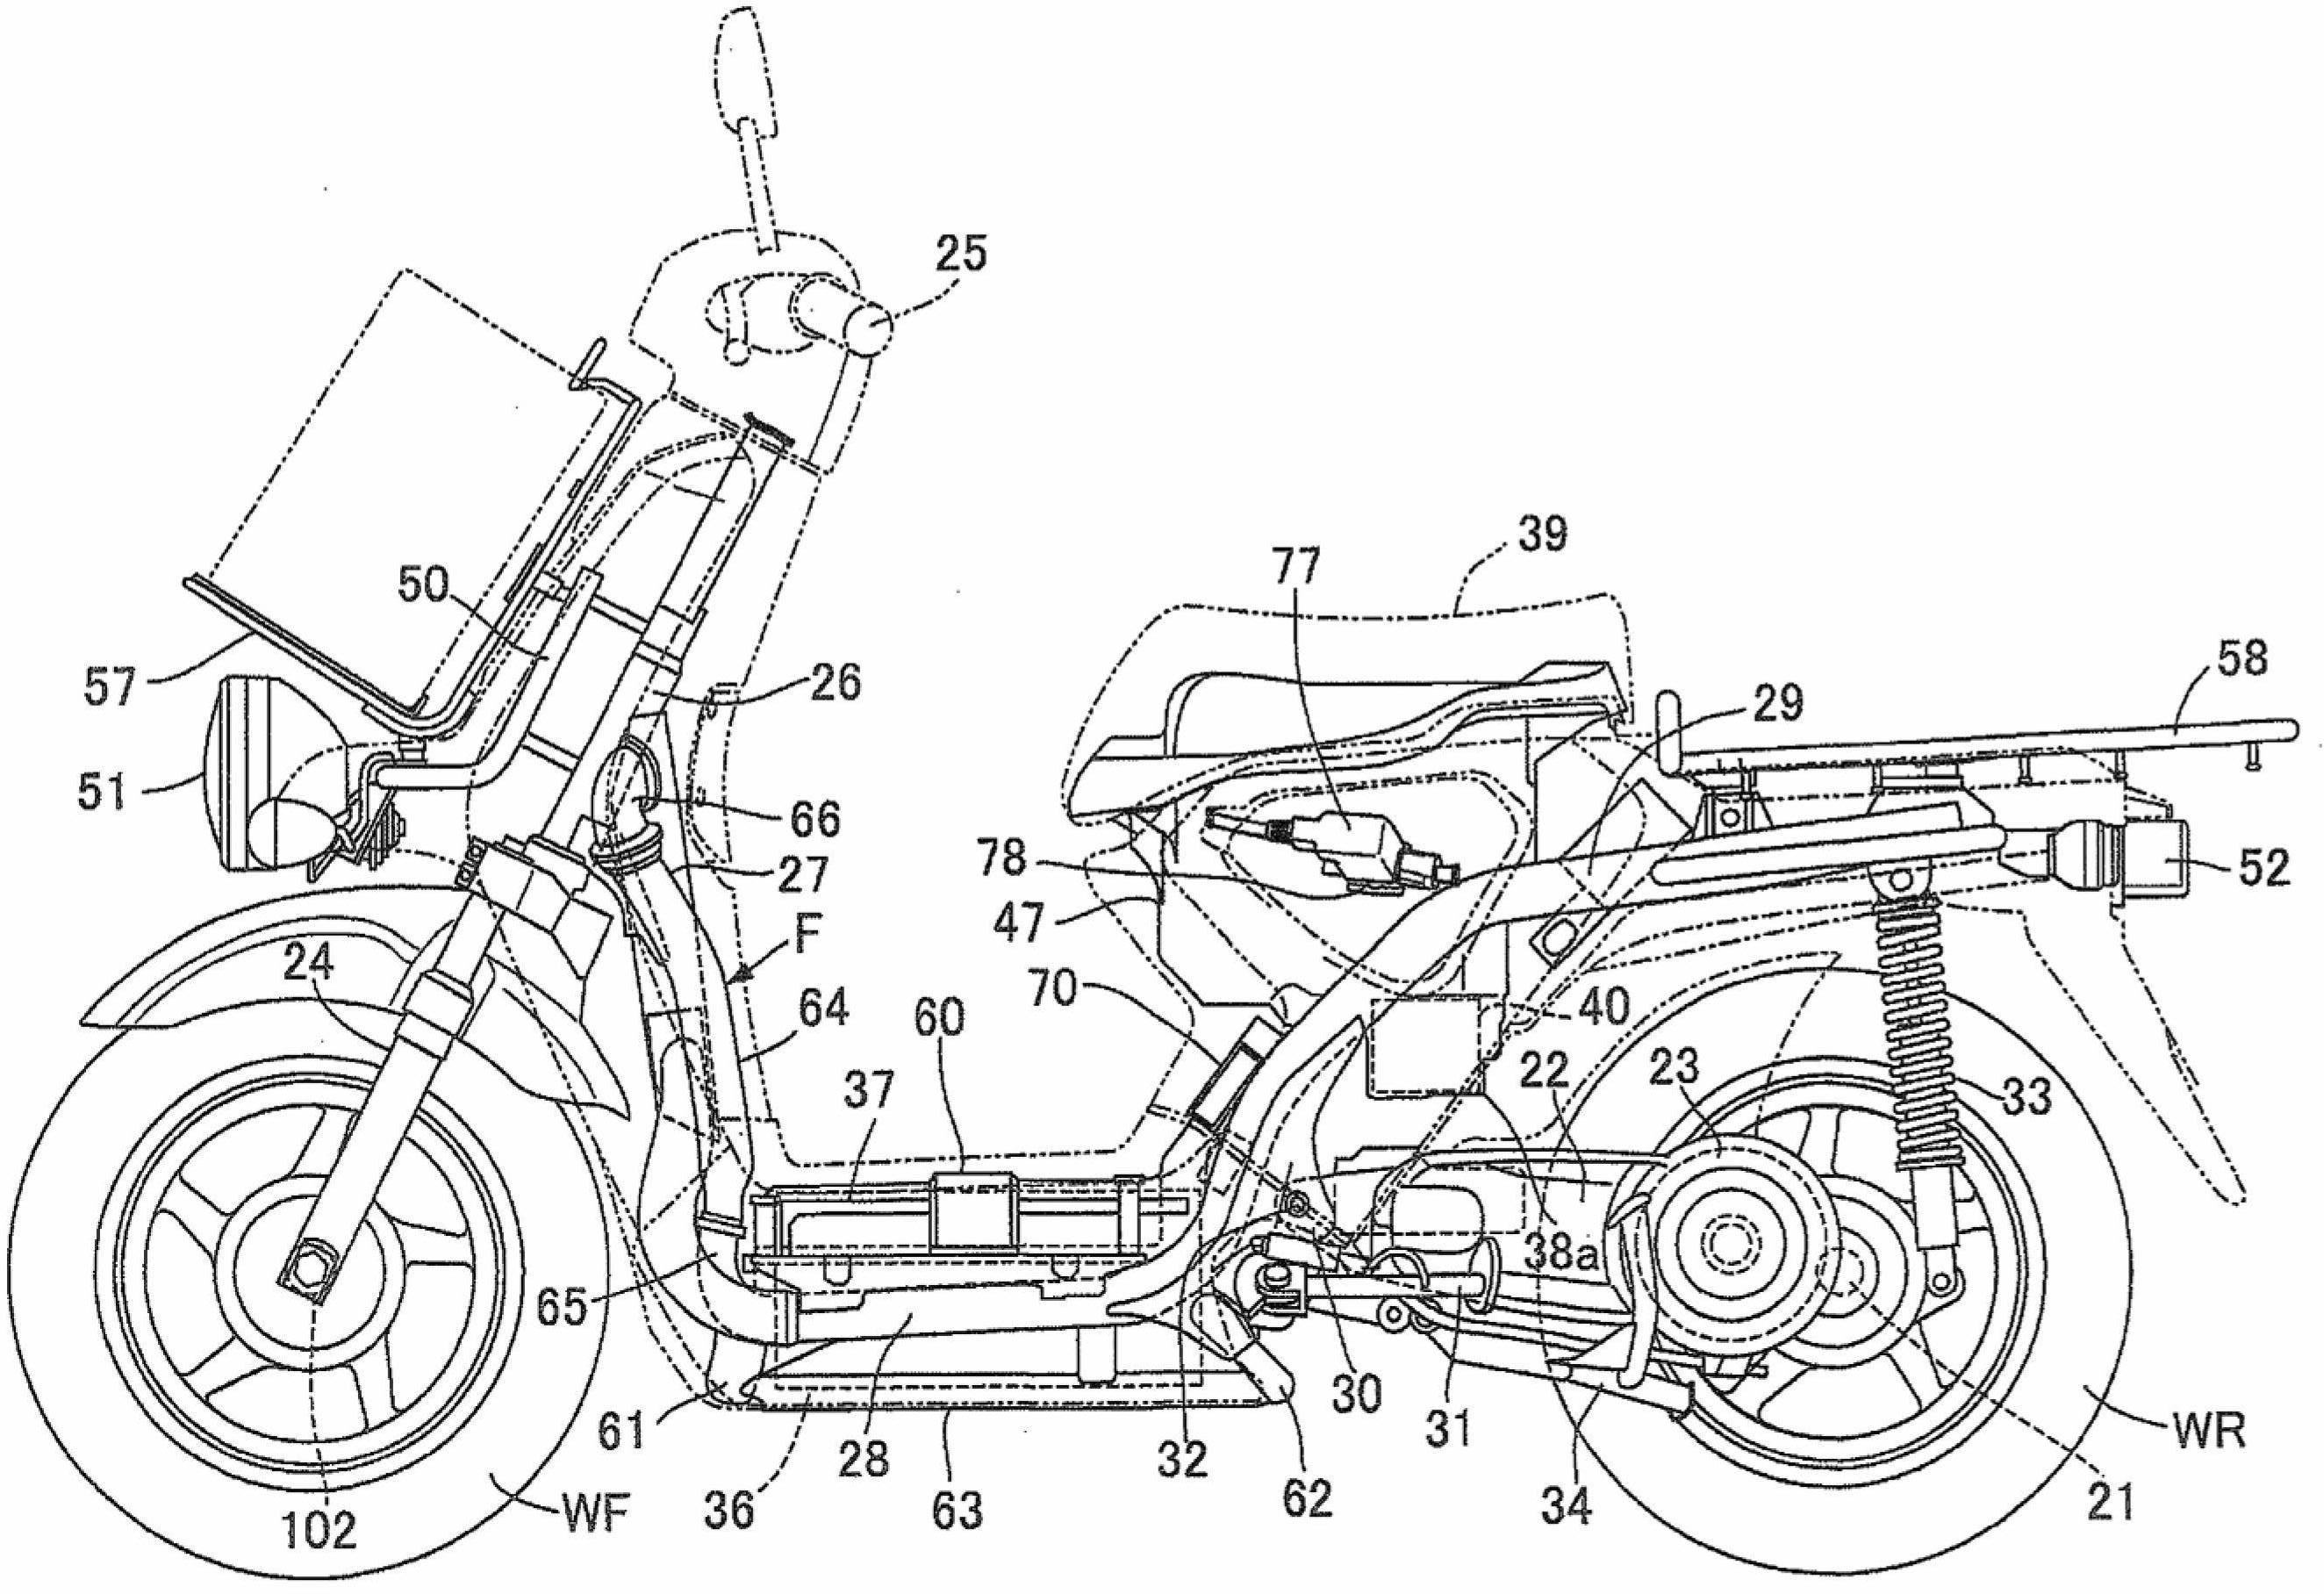 Wiring structure for electrically powered two- or three-wheeled vehicle